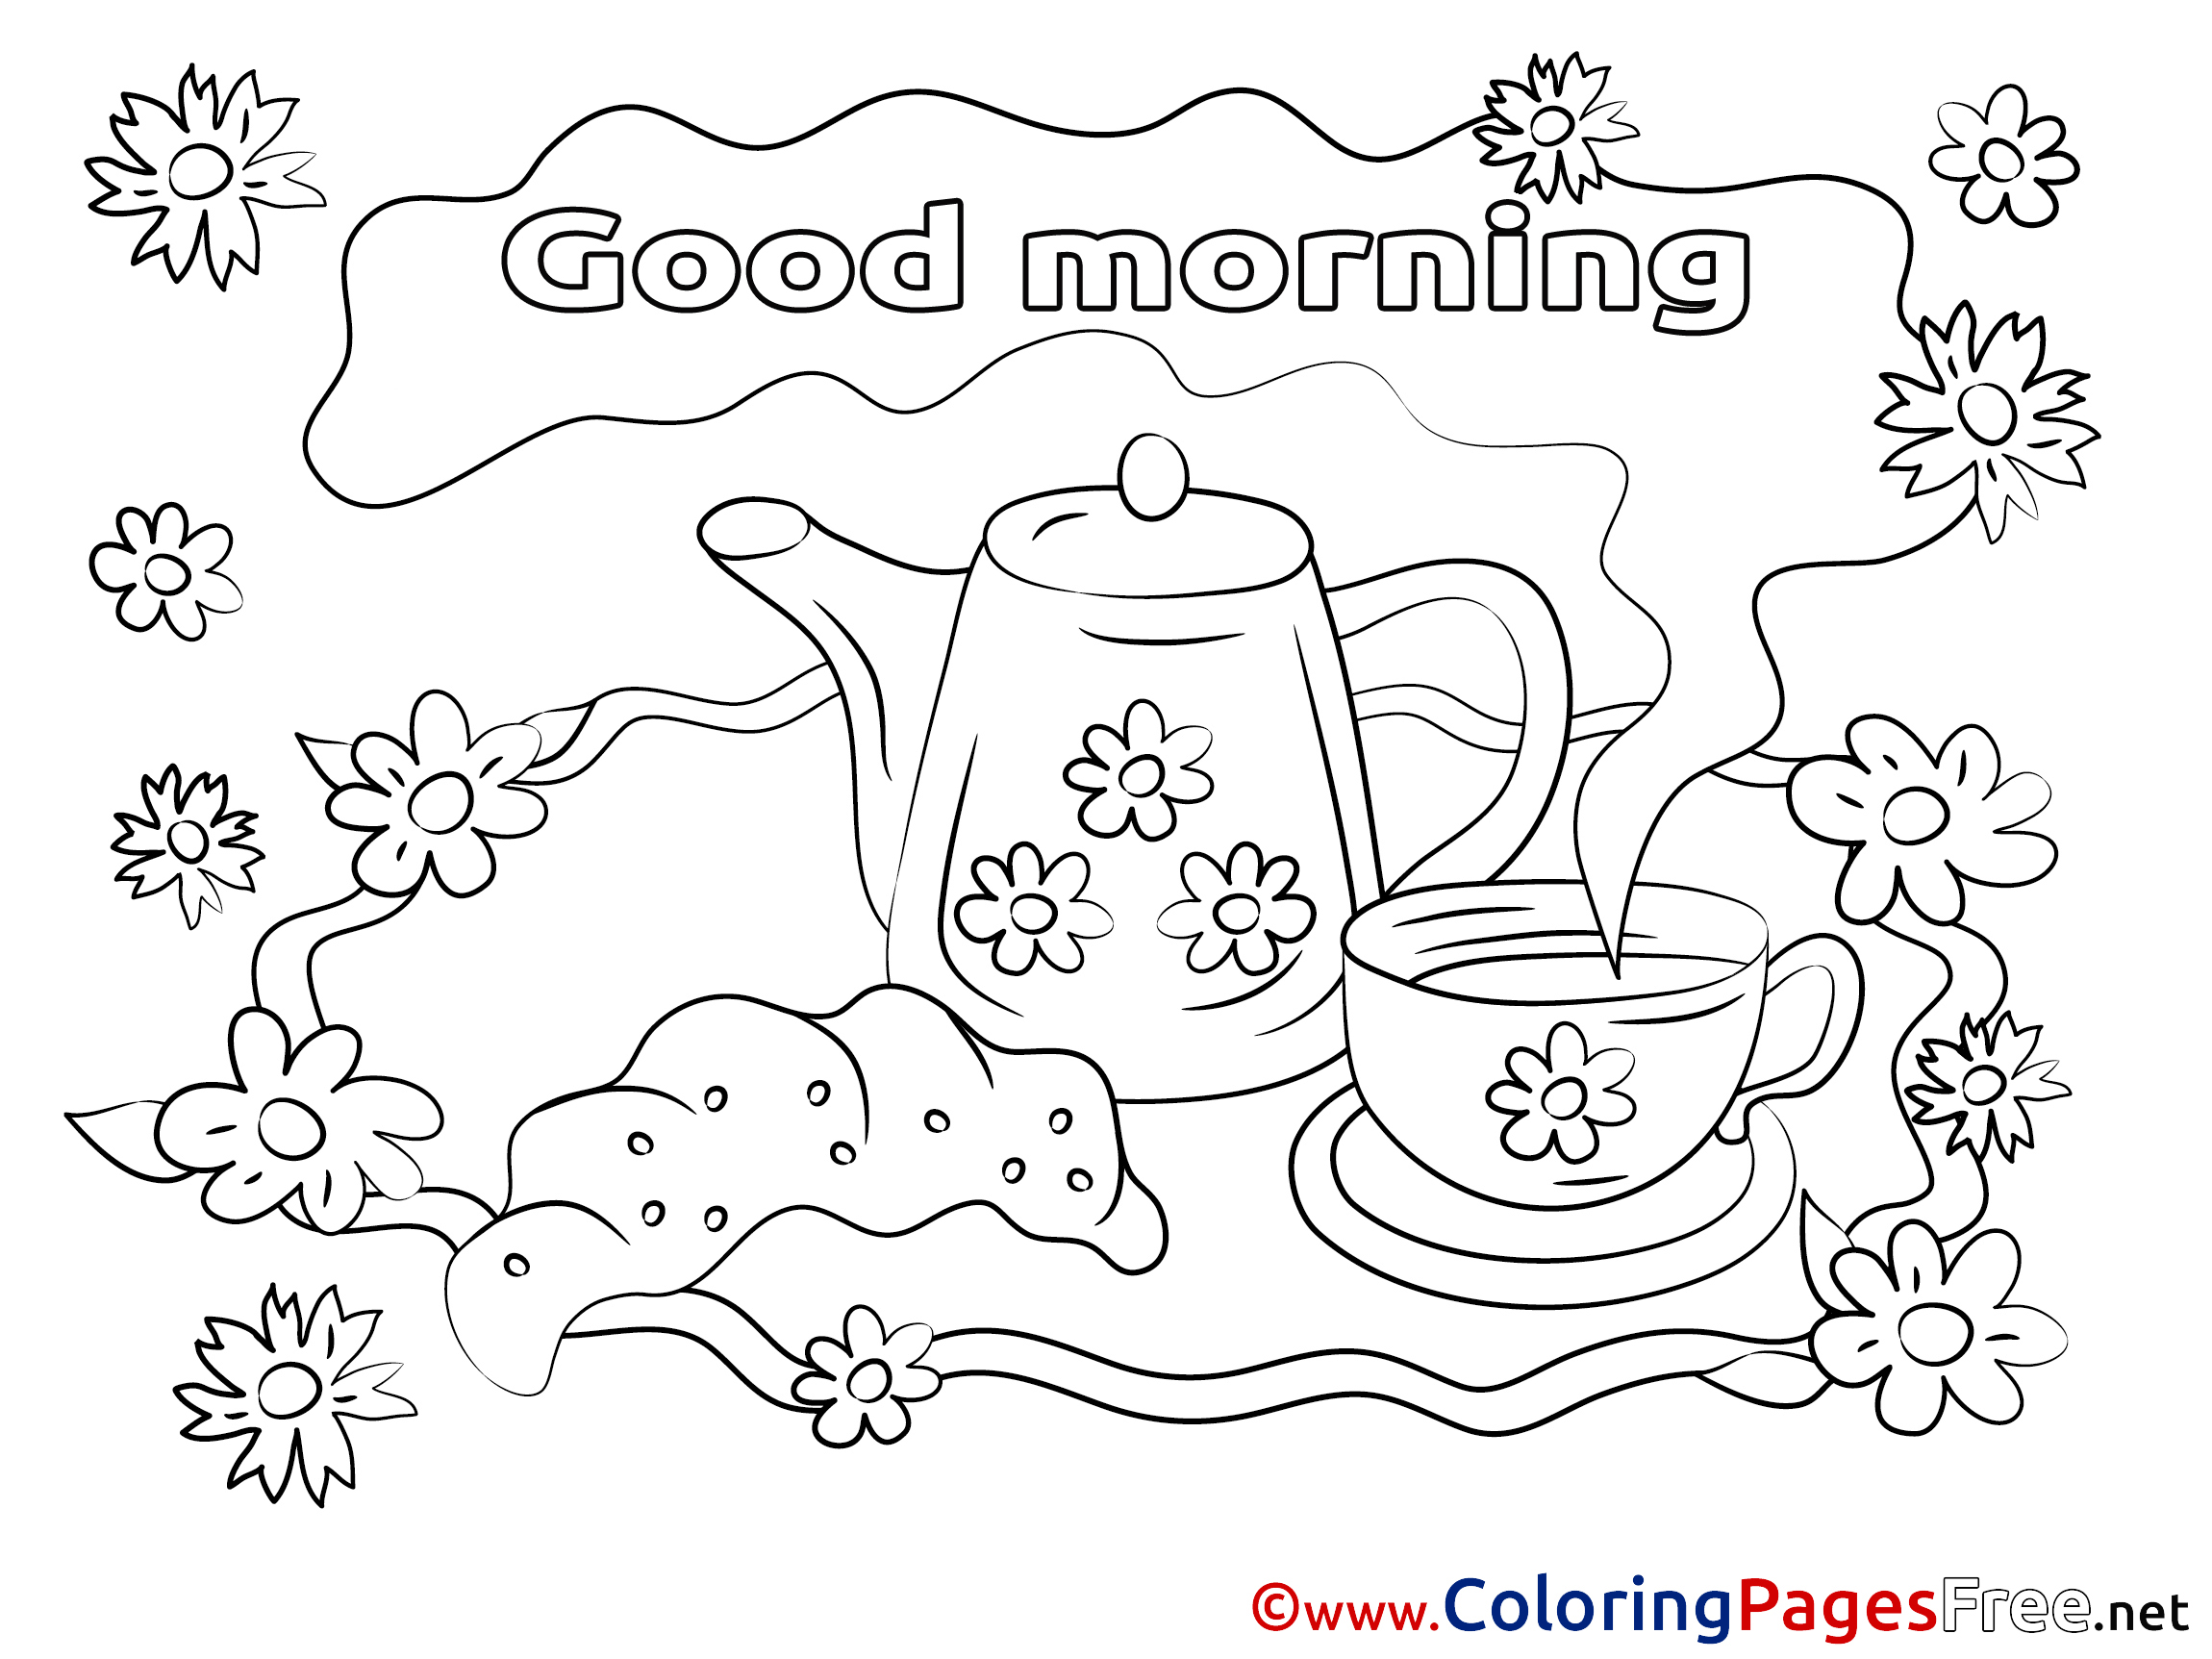 Kettle download Good Morning Coloring Pages